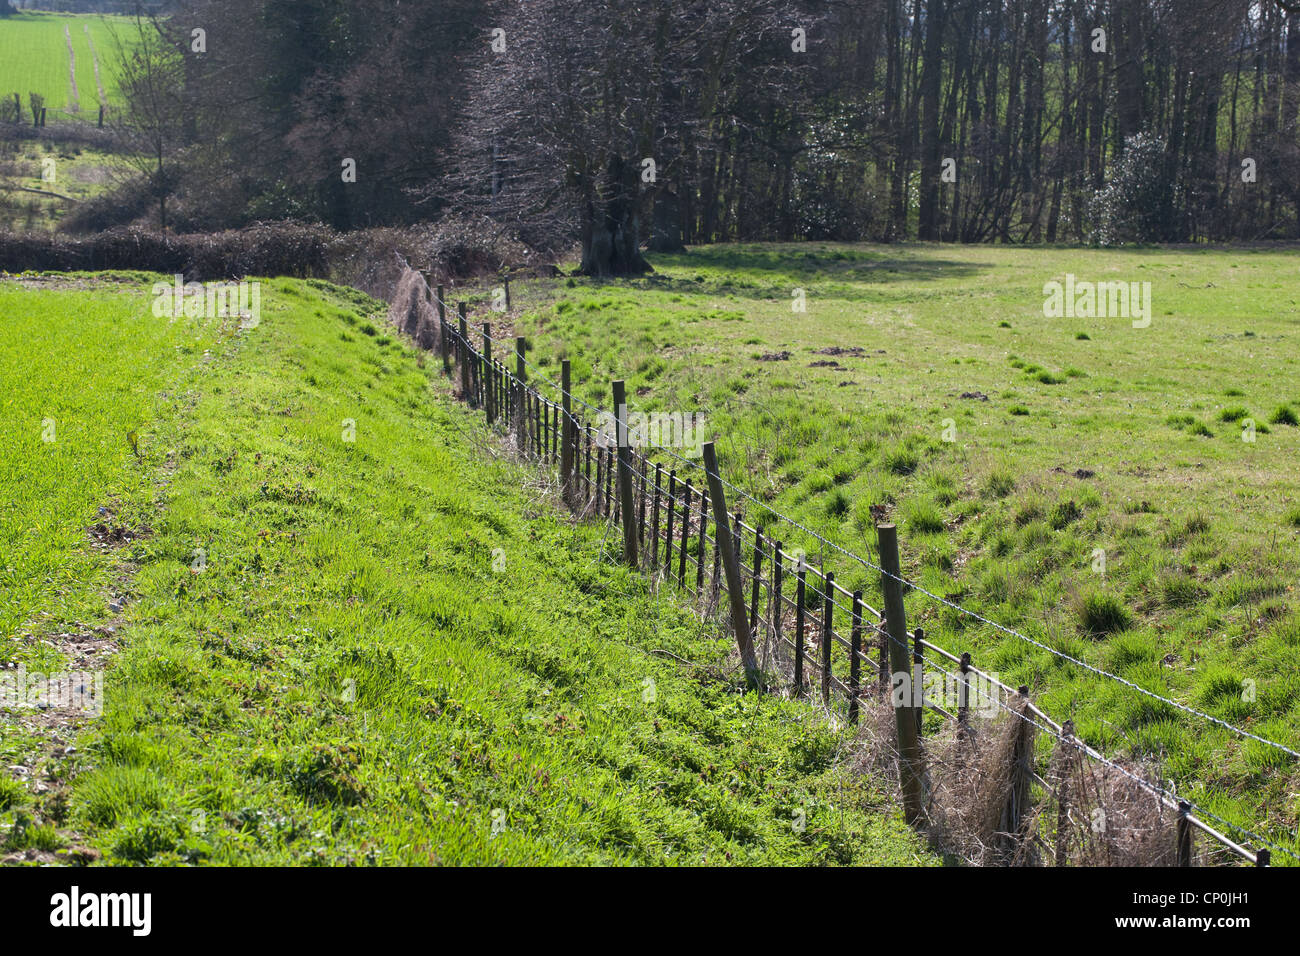 Ha-Ha; hidden fence line, in a dry ditch. Hethersett, Norfolk. Gives uninterrupted view across landscape of livestock, cattle. Stock Photo